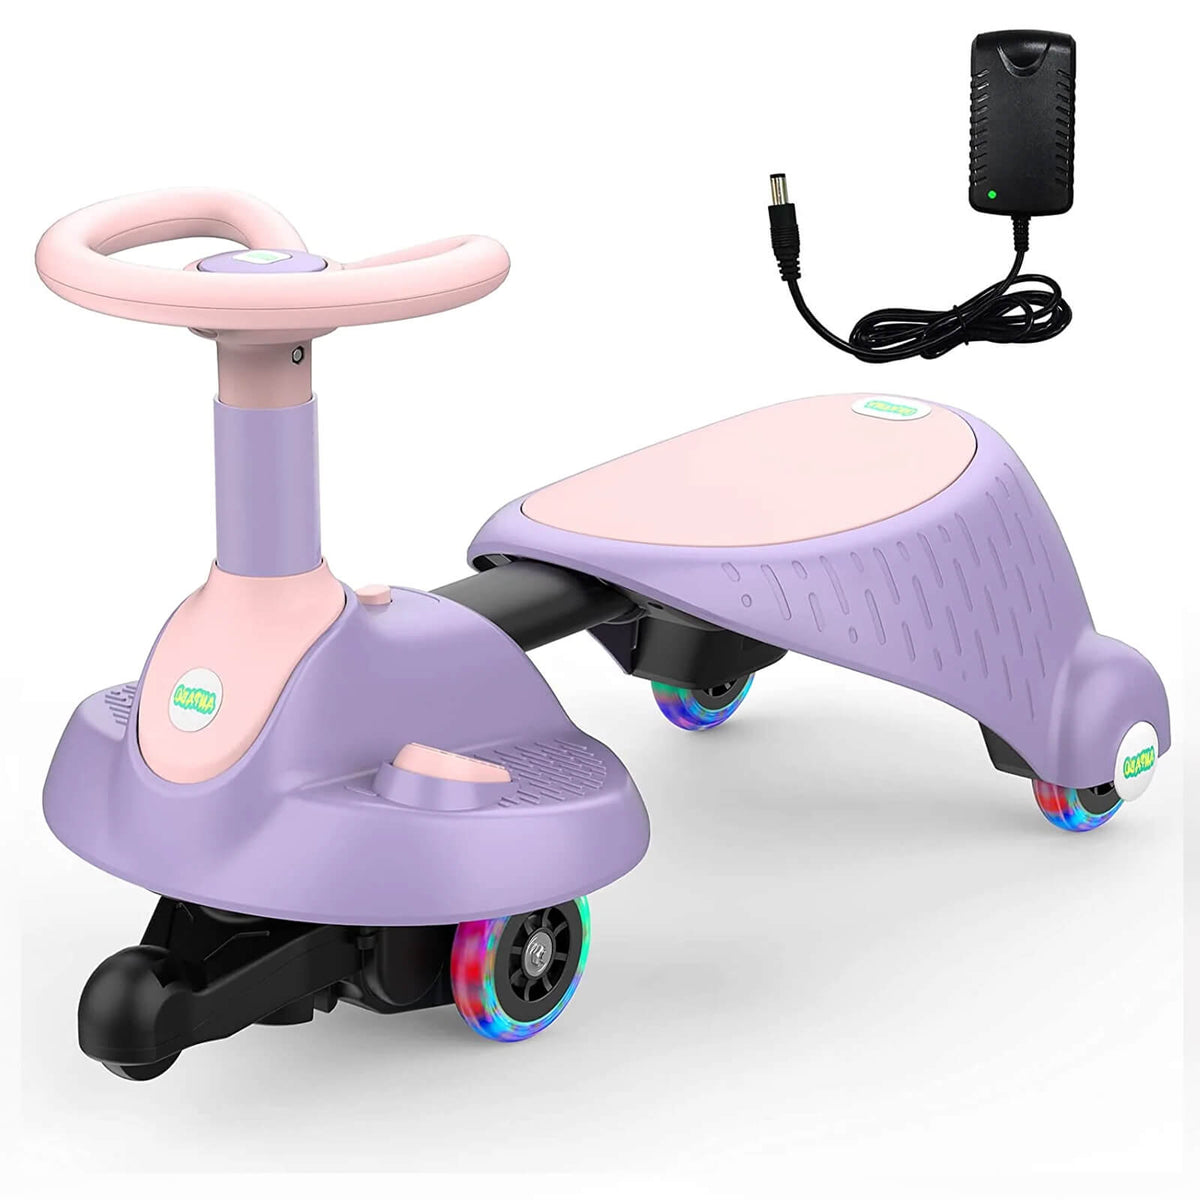 Car Ride on Toy with Pedal Adjustable Length